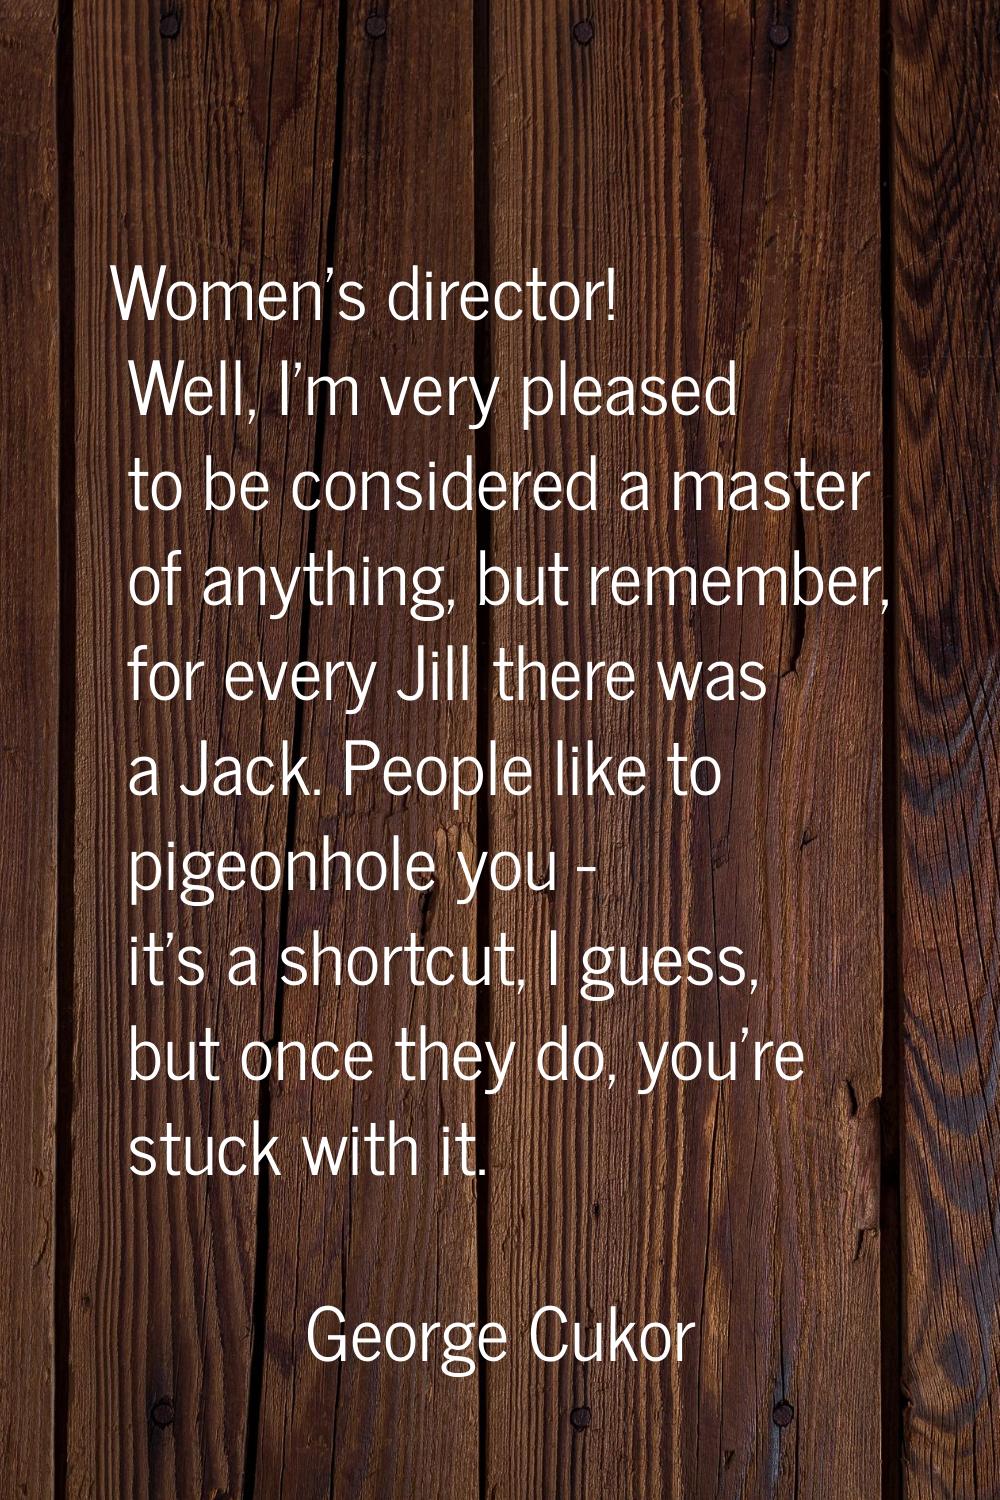 Women's director! Well, I'm very pleased to be considered a master of anything, but remember, for e